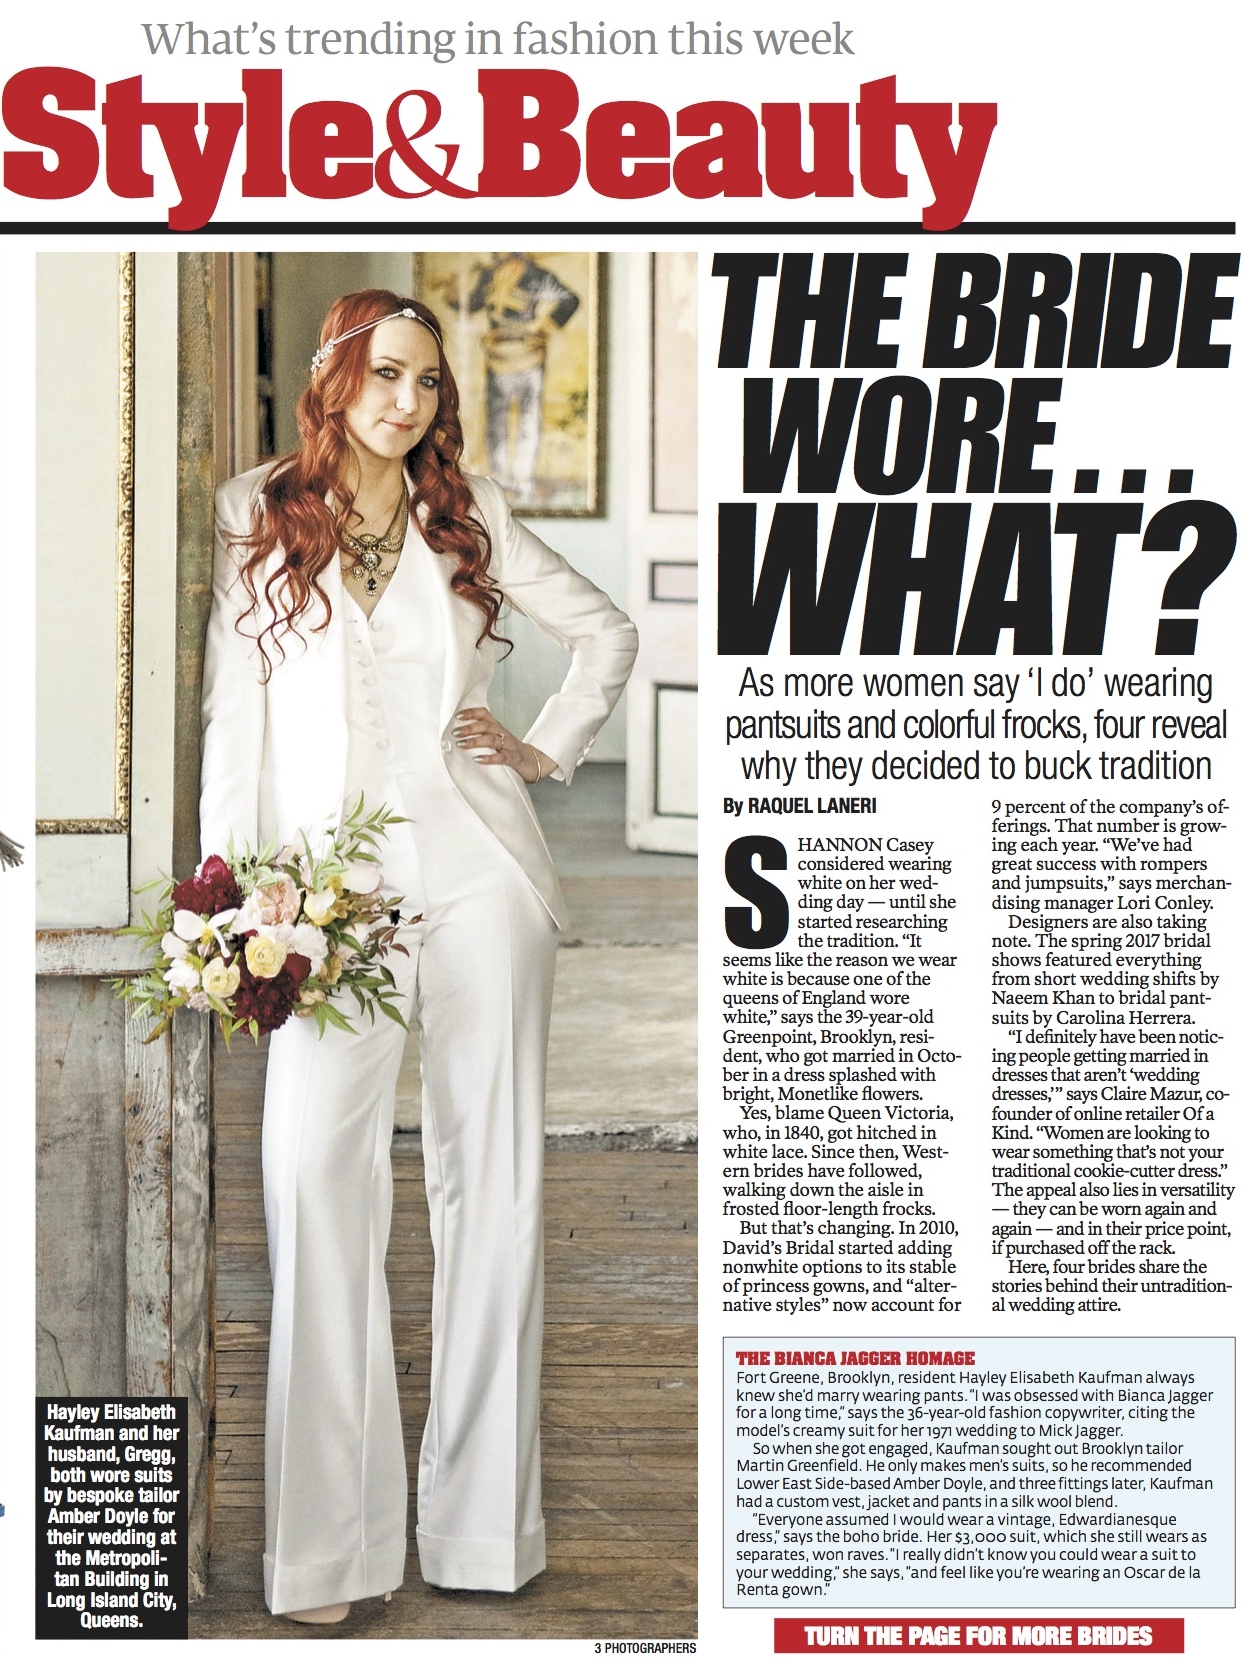 Amber Doyle / NYpost /the bride wore what?